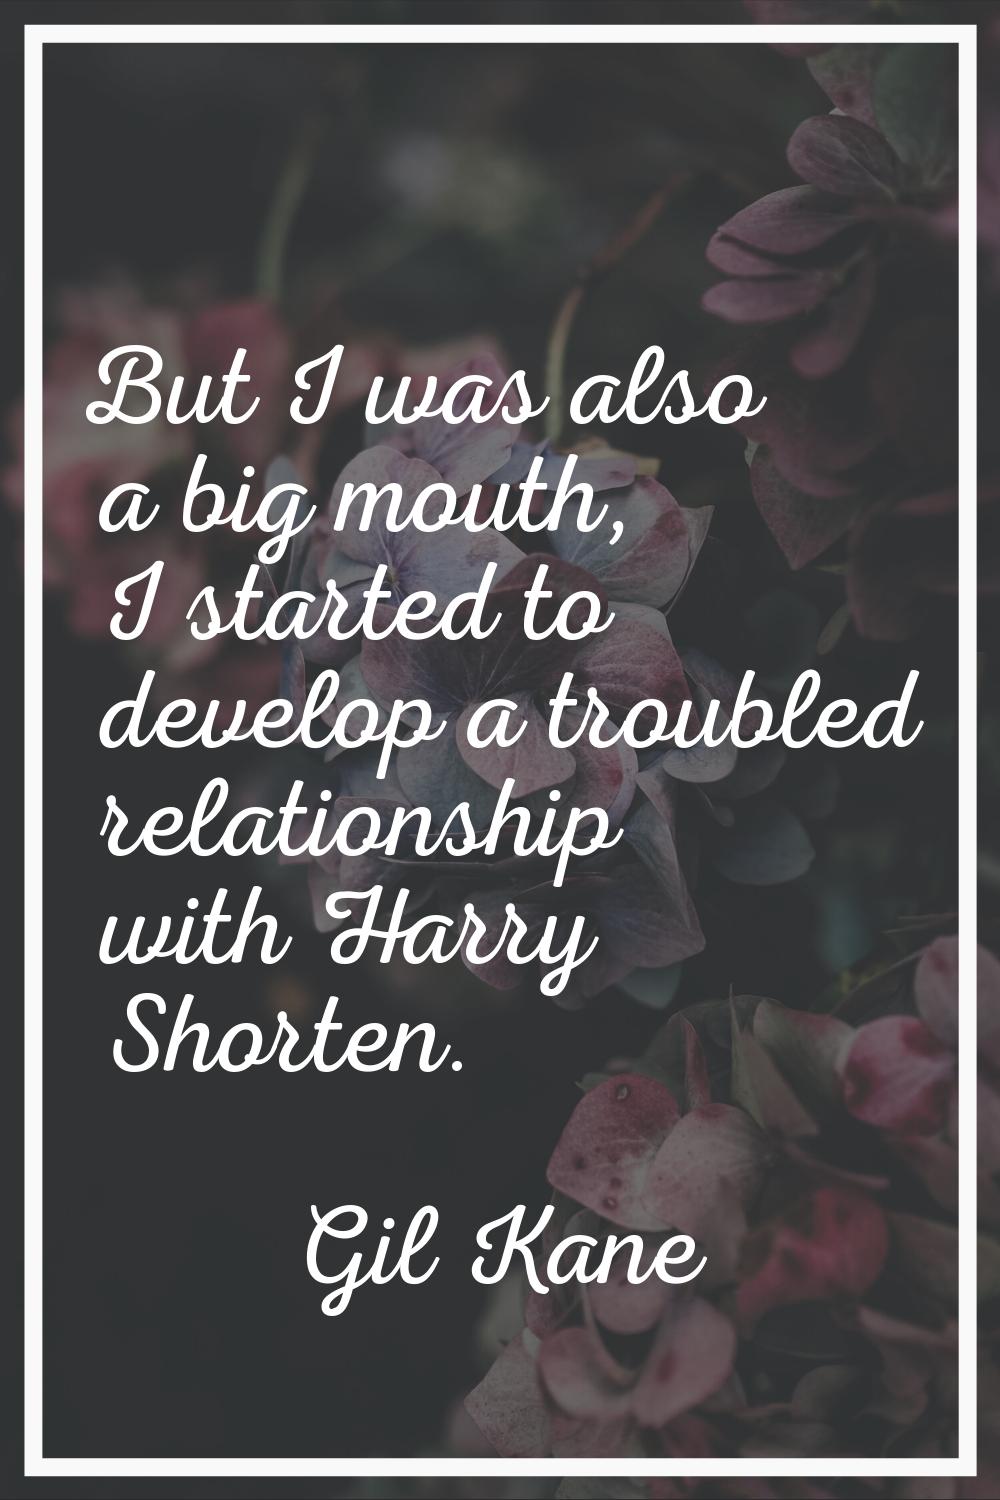 But I was also a big mouth, I started to develop a troubled relationship with Harry Shorten.